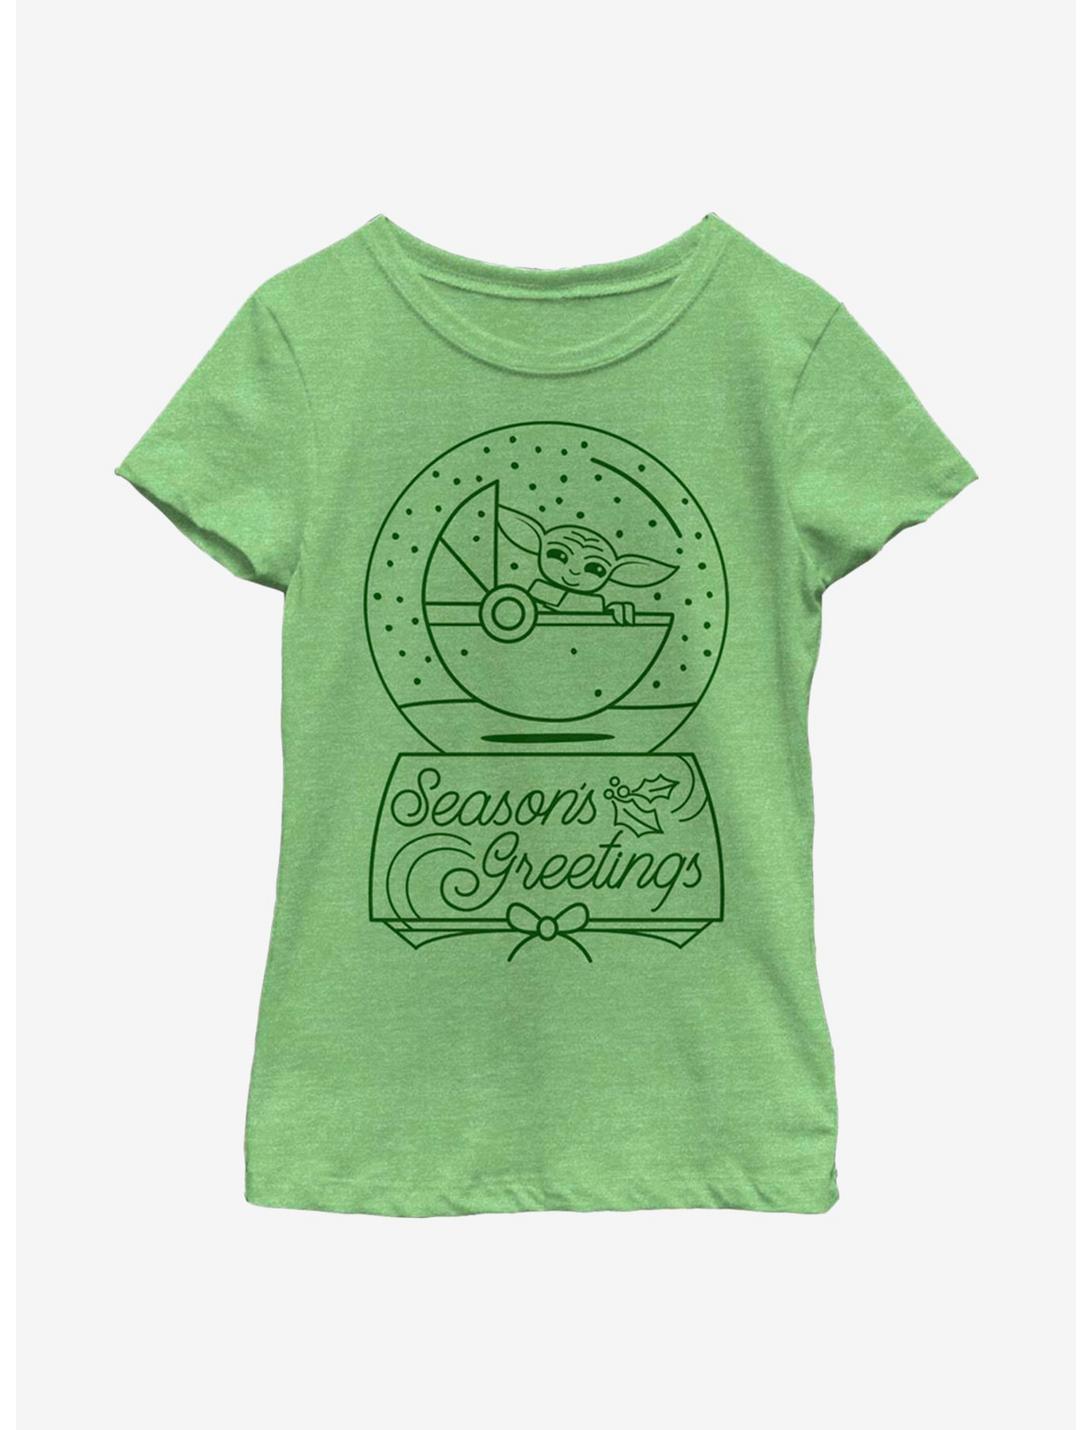 Star Wars The Mandalorian The Child Greetings Outline Youth Girls T-Shirt, GRN APPLE, hi-res